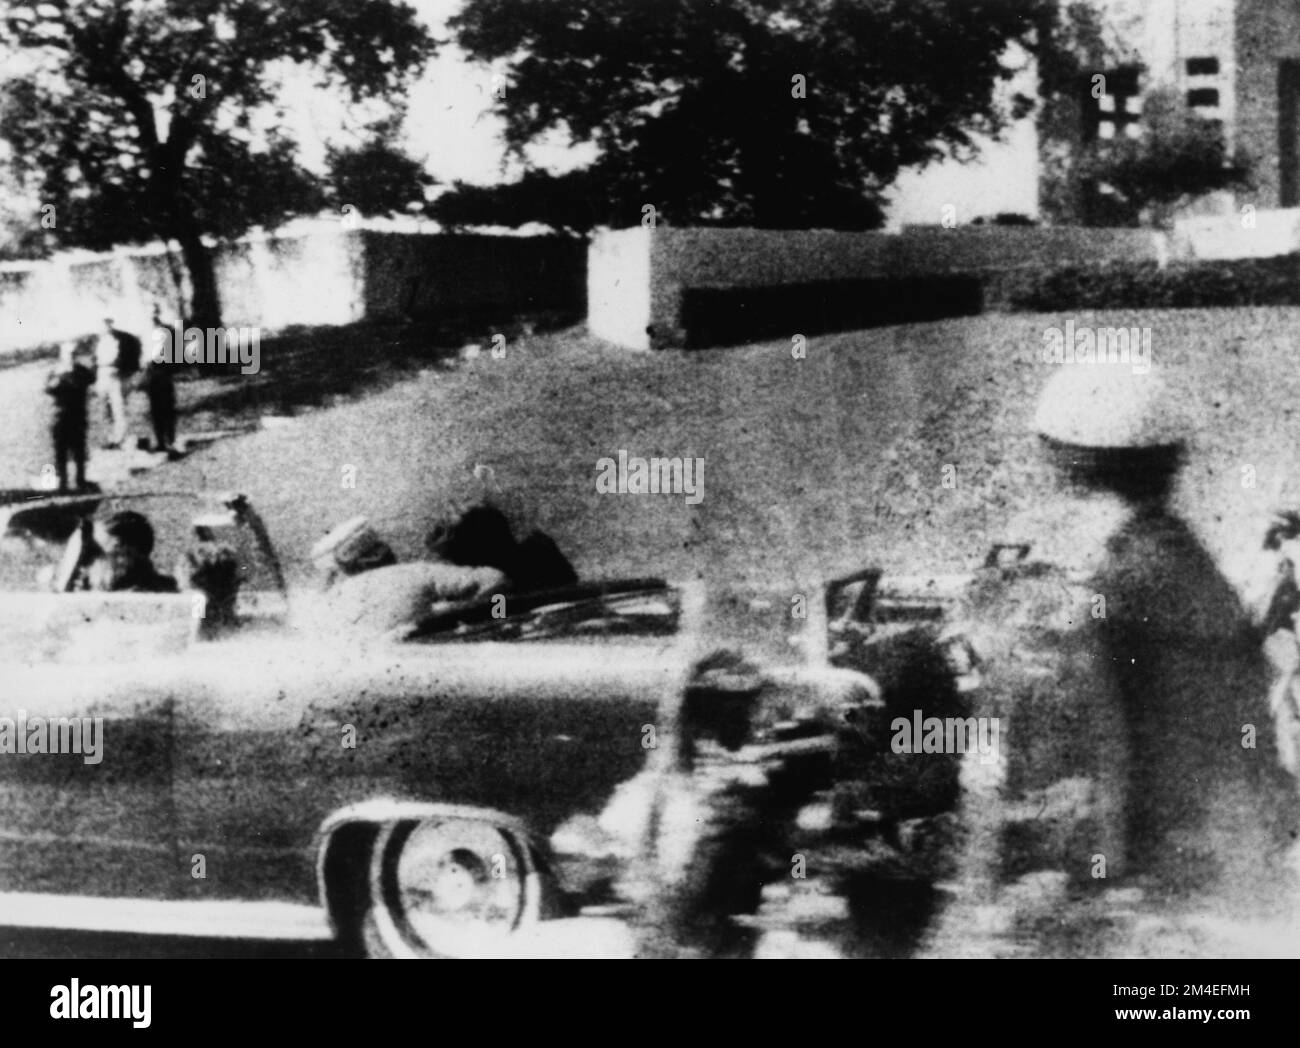 Polaroid photo by Mary Moorman taken a fraction of a second after the fatal shot during teh assassination of President John F Kennedy in Dallas, Texas on the 22rd November 1963. The photo shows Kennedy clearly reeling to his left. His wife Jackie has already turned to him as he had already been hit by one bullet in the back before the second hit him in the head. Stock Photo